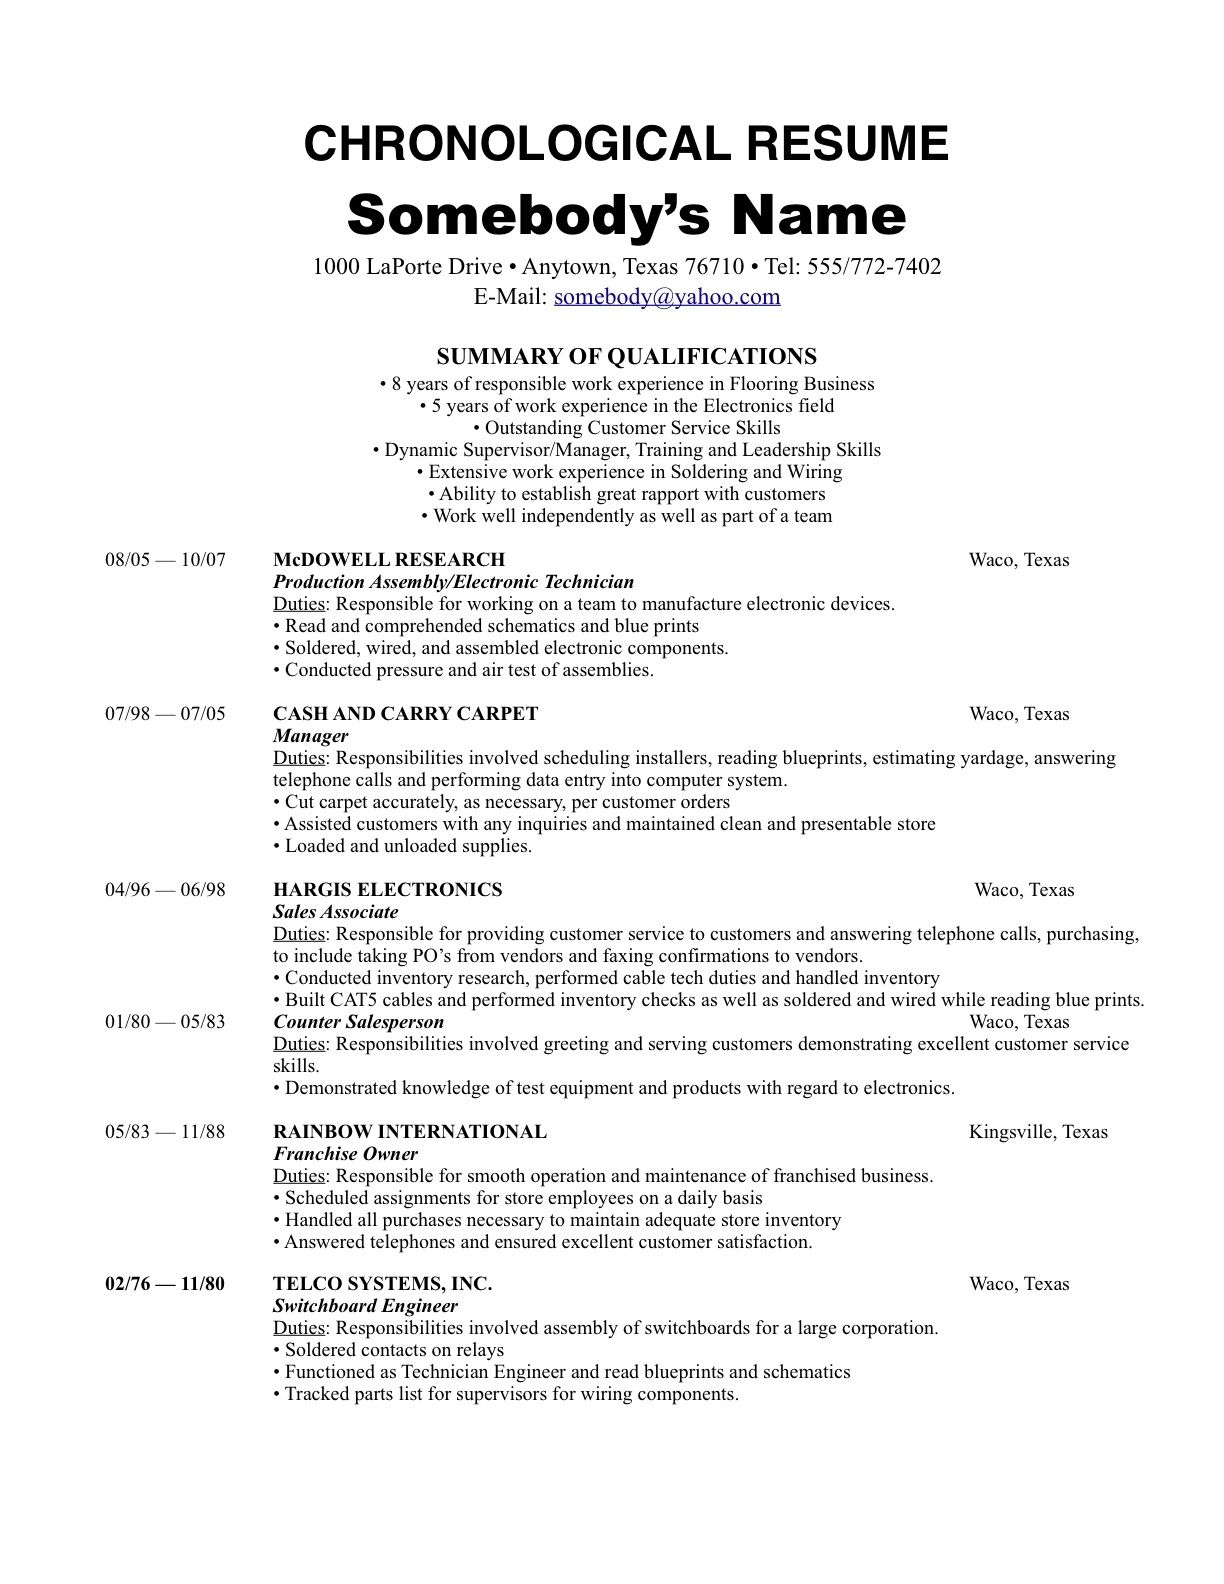 Chronological Order Resume Example Dc0364f86 The Most ...